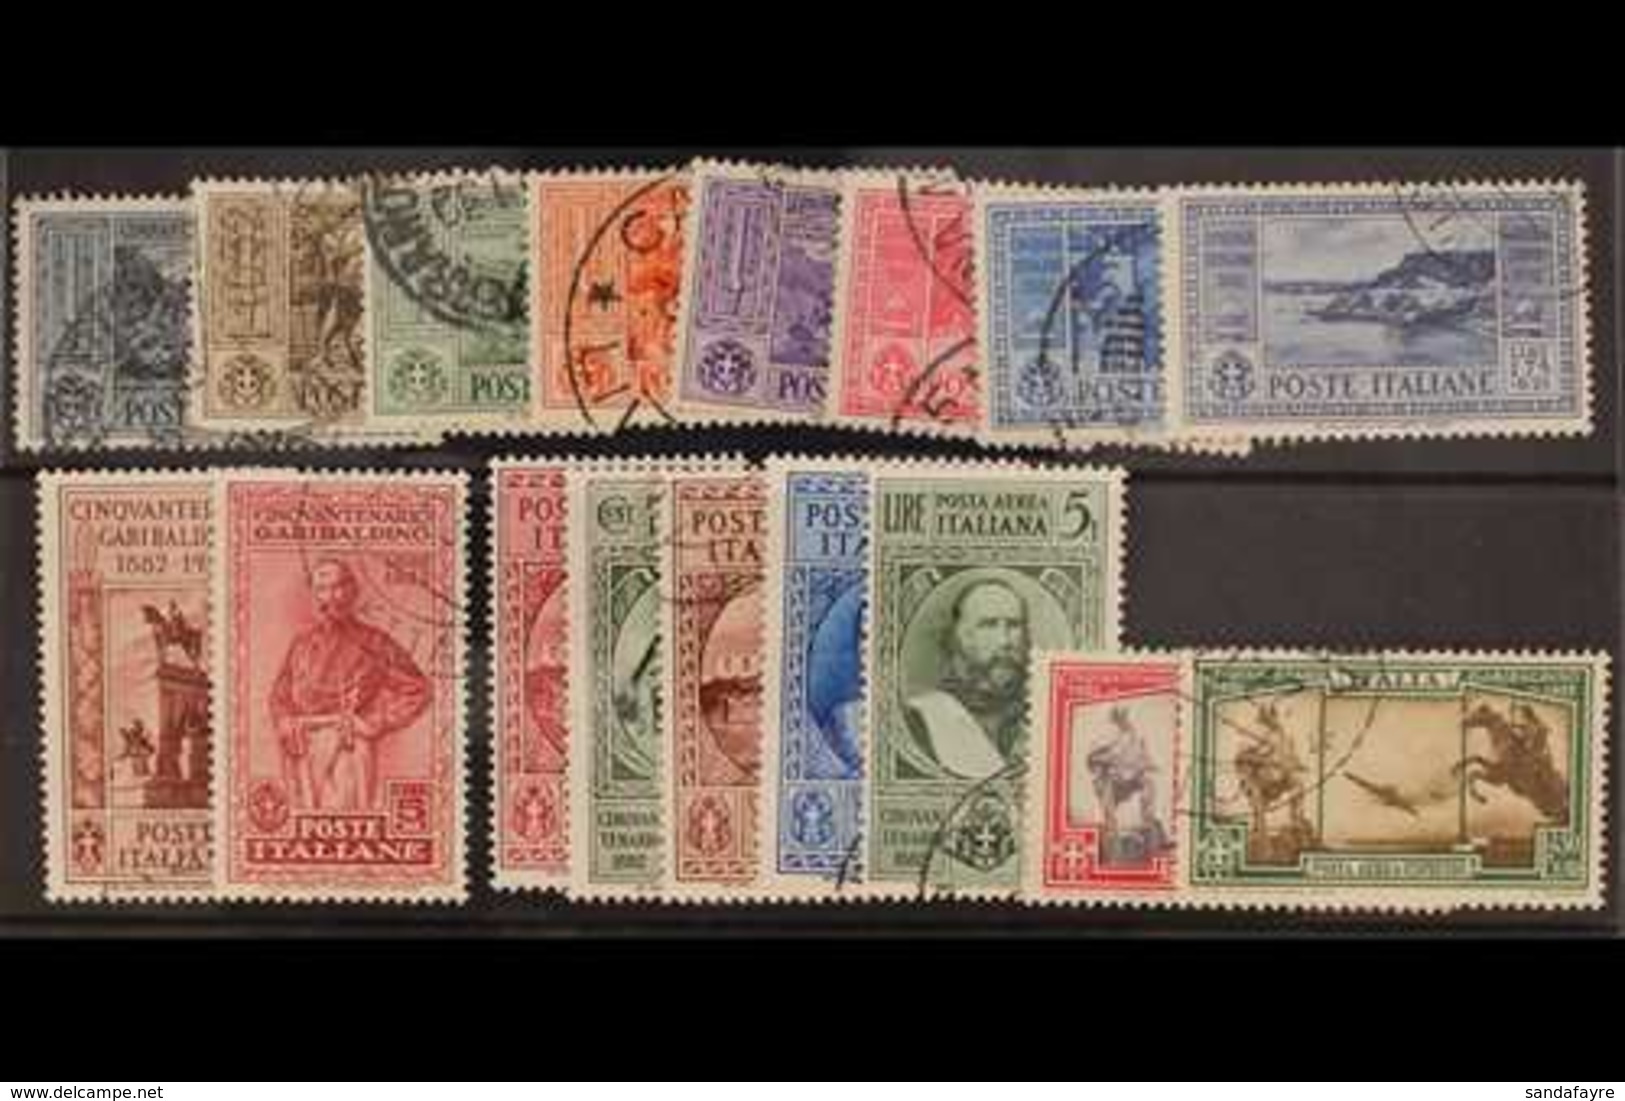 1932 Garibaldi (Postage, Air And Air Express) Complete Set (Sass S. 64, SG 333/E349), Used. (17 Stamps) For More Images, - Unclassified